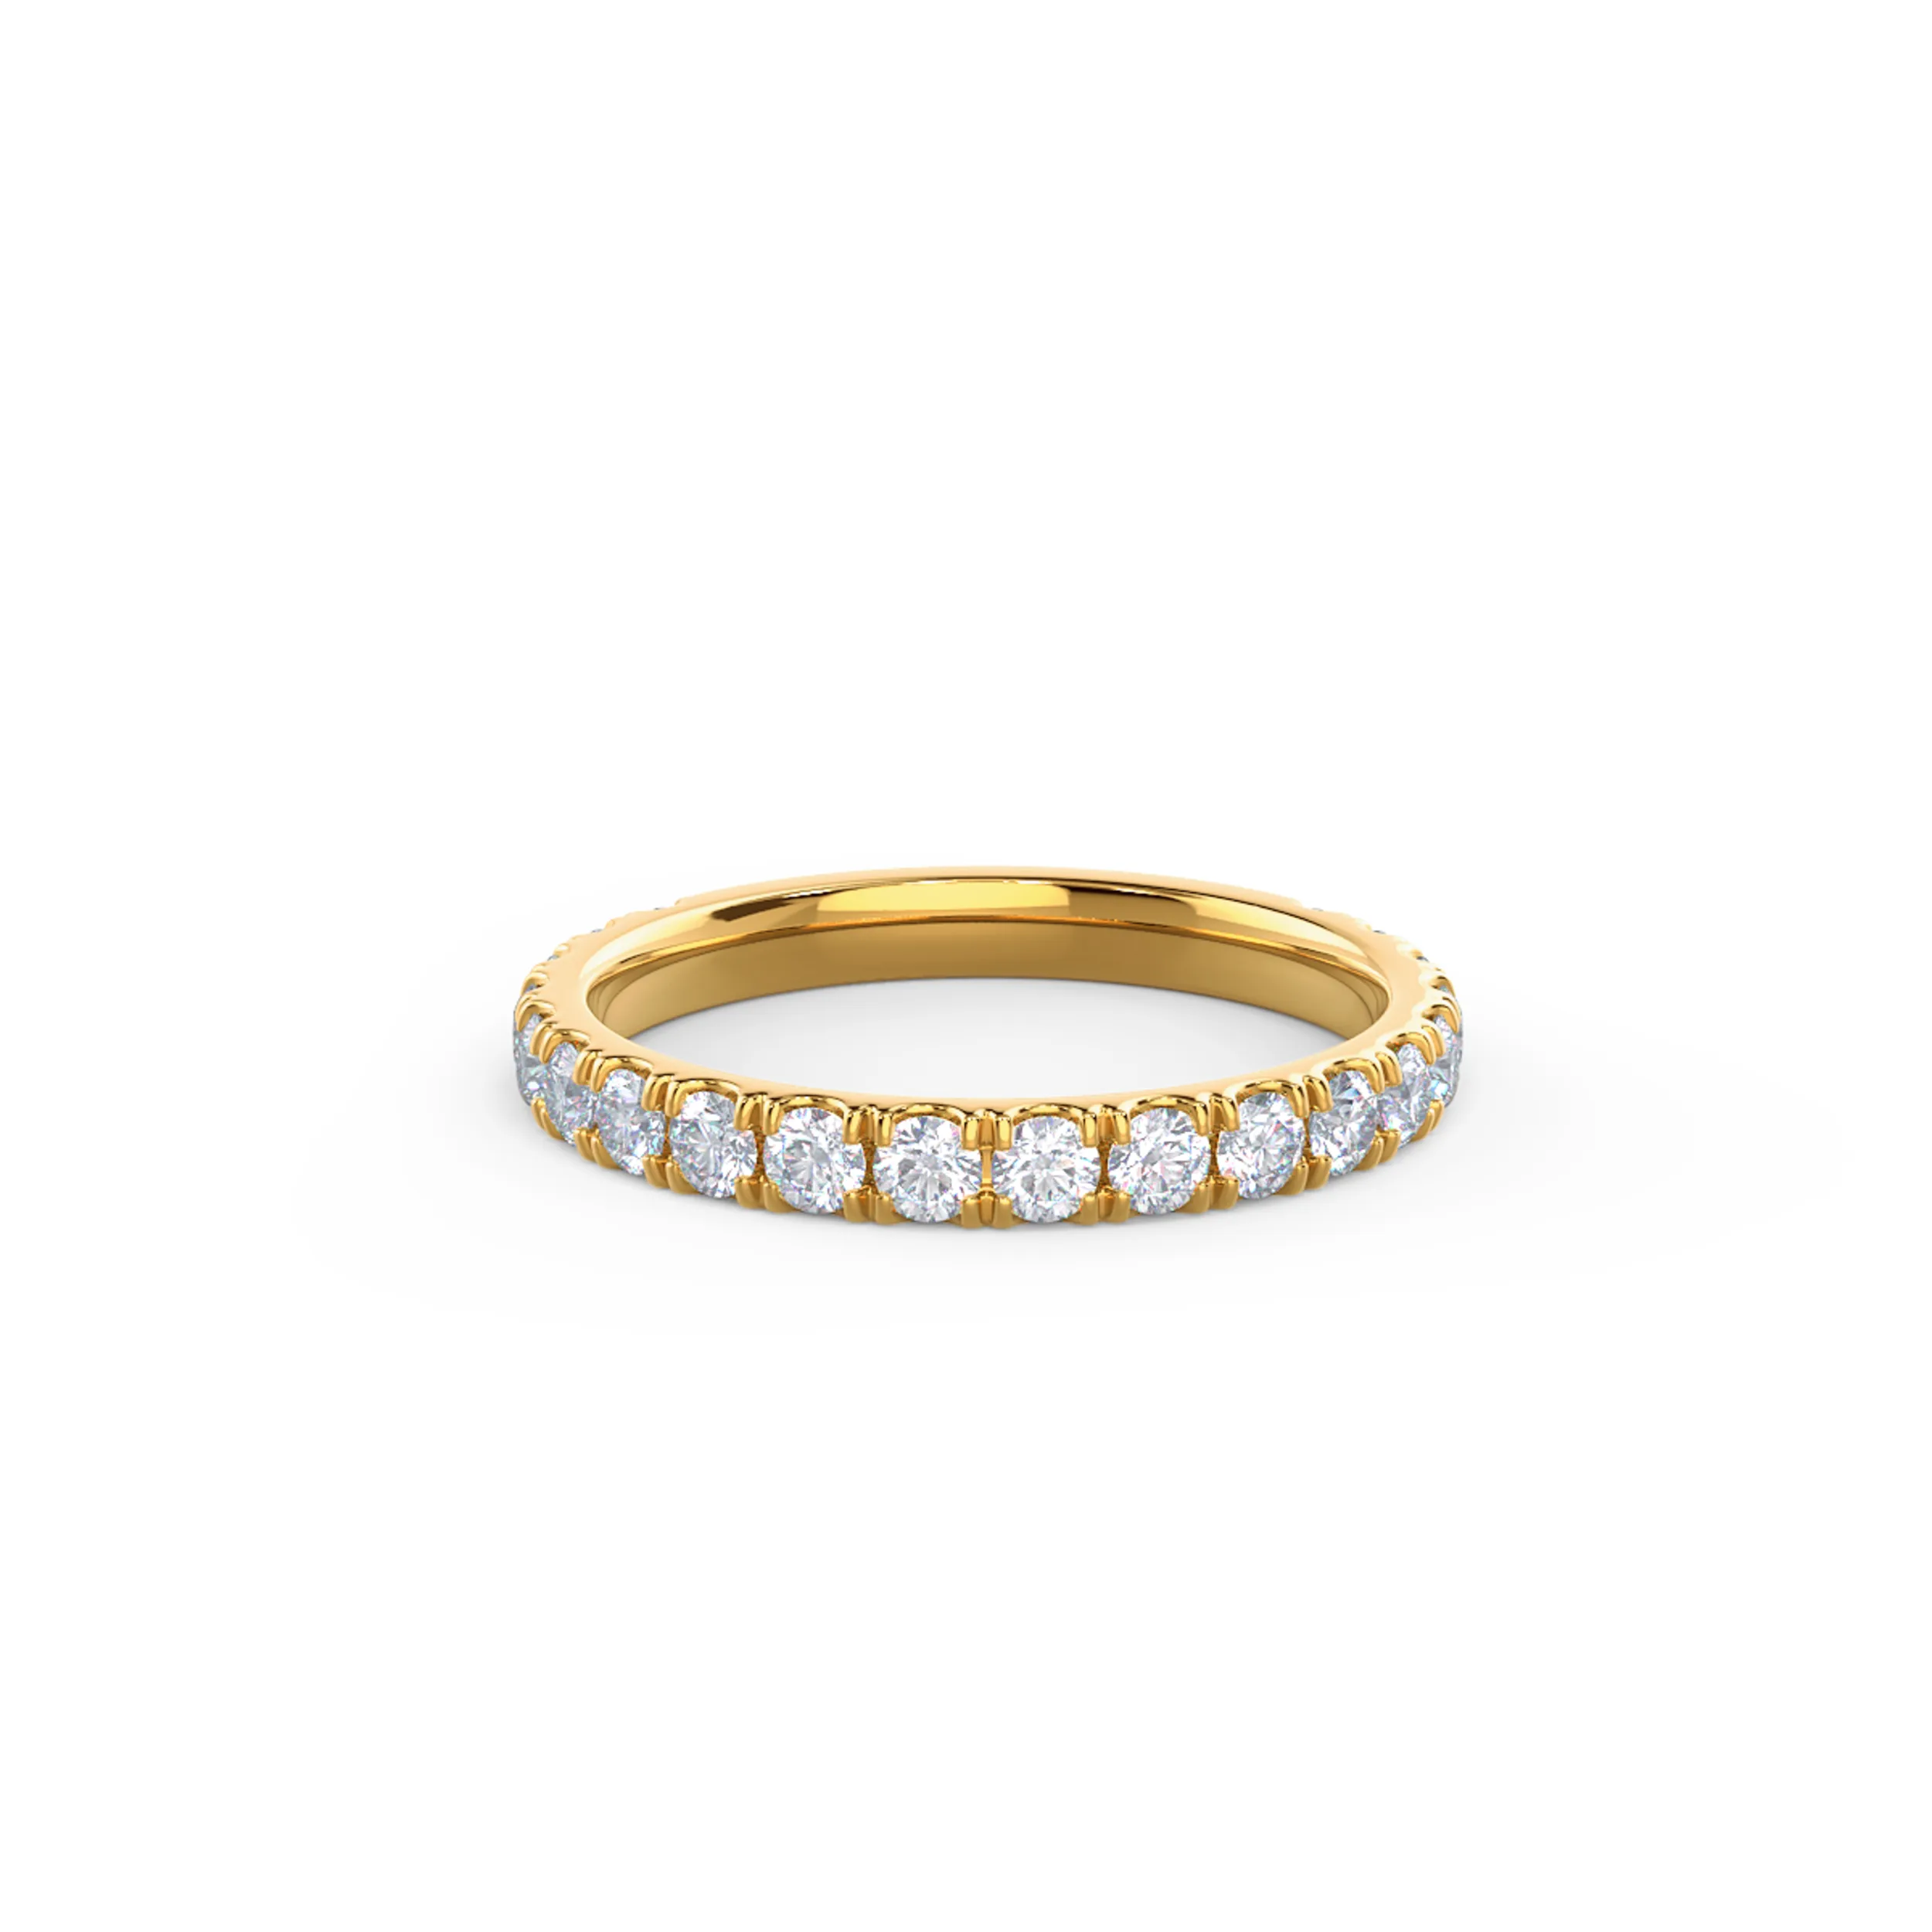 Hand Selected 0.75 ct Round Brilliant Lab Grown Diamonds U Pavé Three Quarter Band in 14k Yellow Gold (Main View)